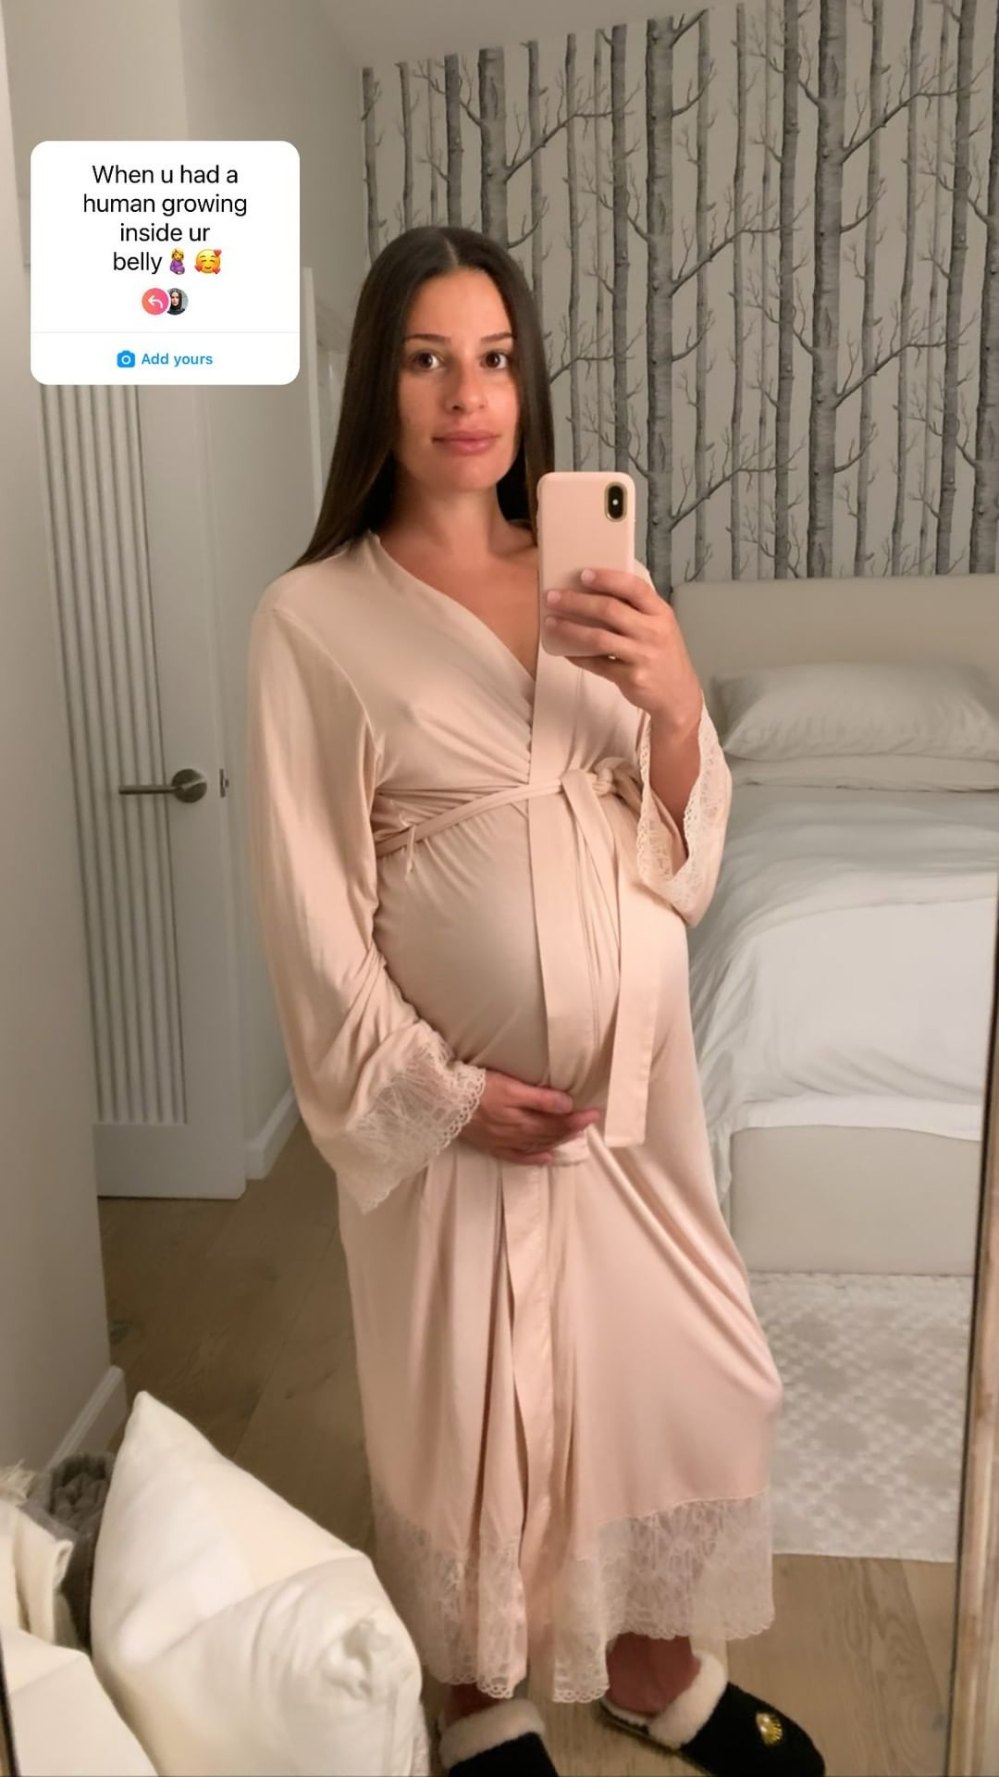 Lea Michele Shares Throwback Bump Photo: Revisit Her Pregnancy Pics